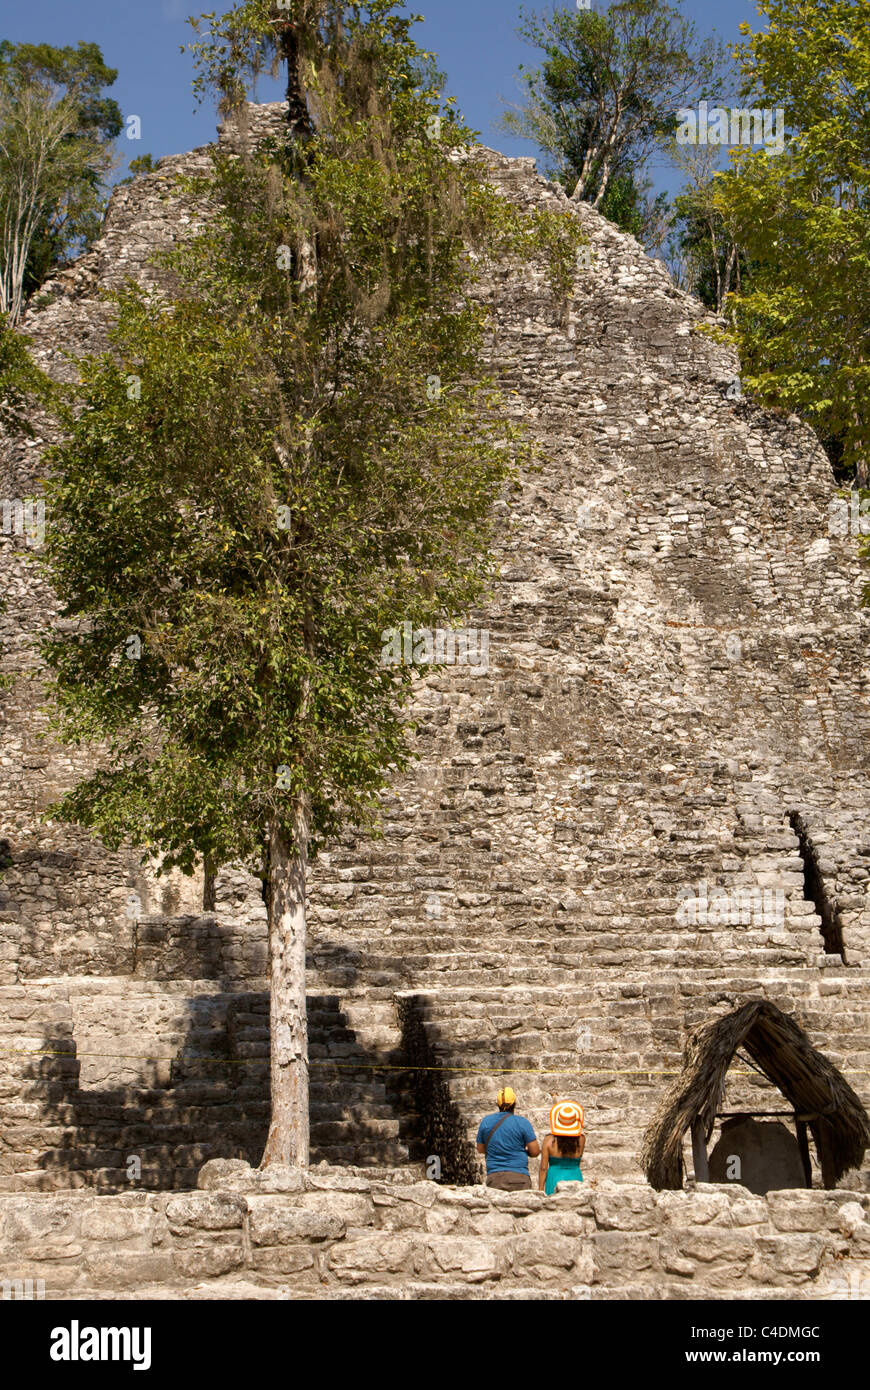 Tourist couple looking up at La Iglesia or Church pyramid in the Cobá Group at the Mayan ruins of Cobá, Quintana Roo, Mexico Stock Photo